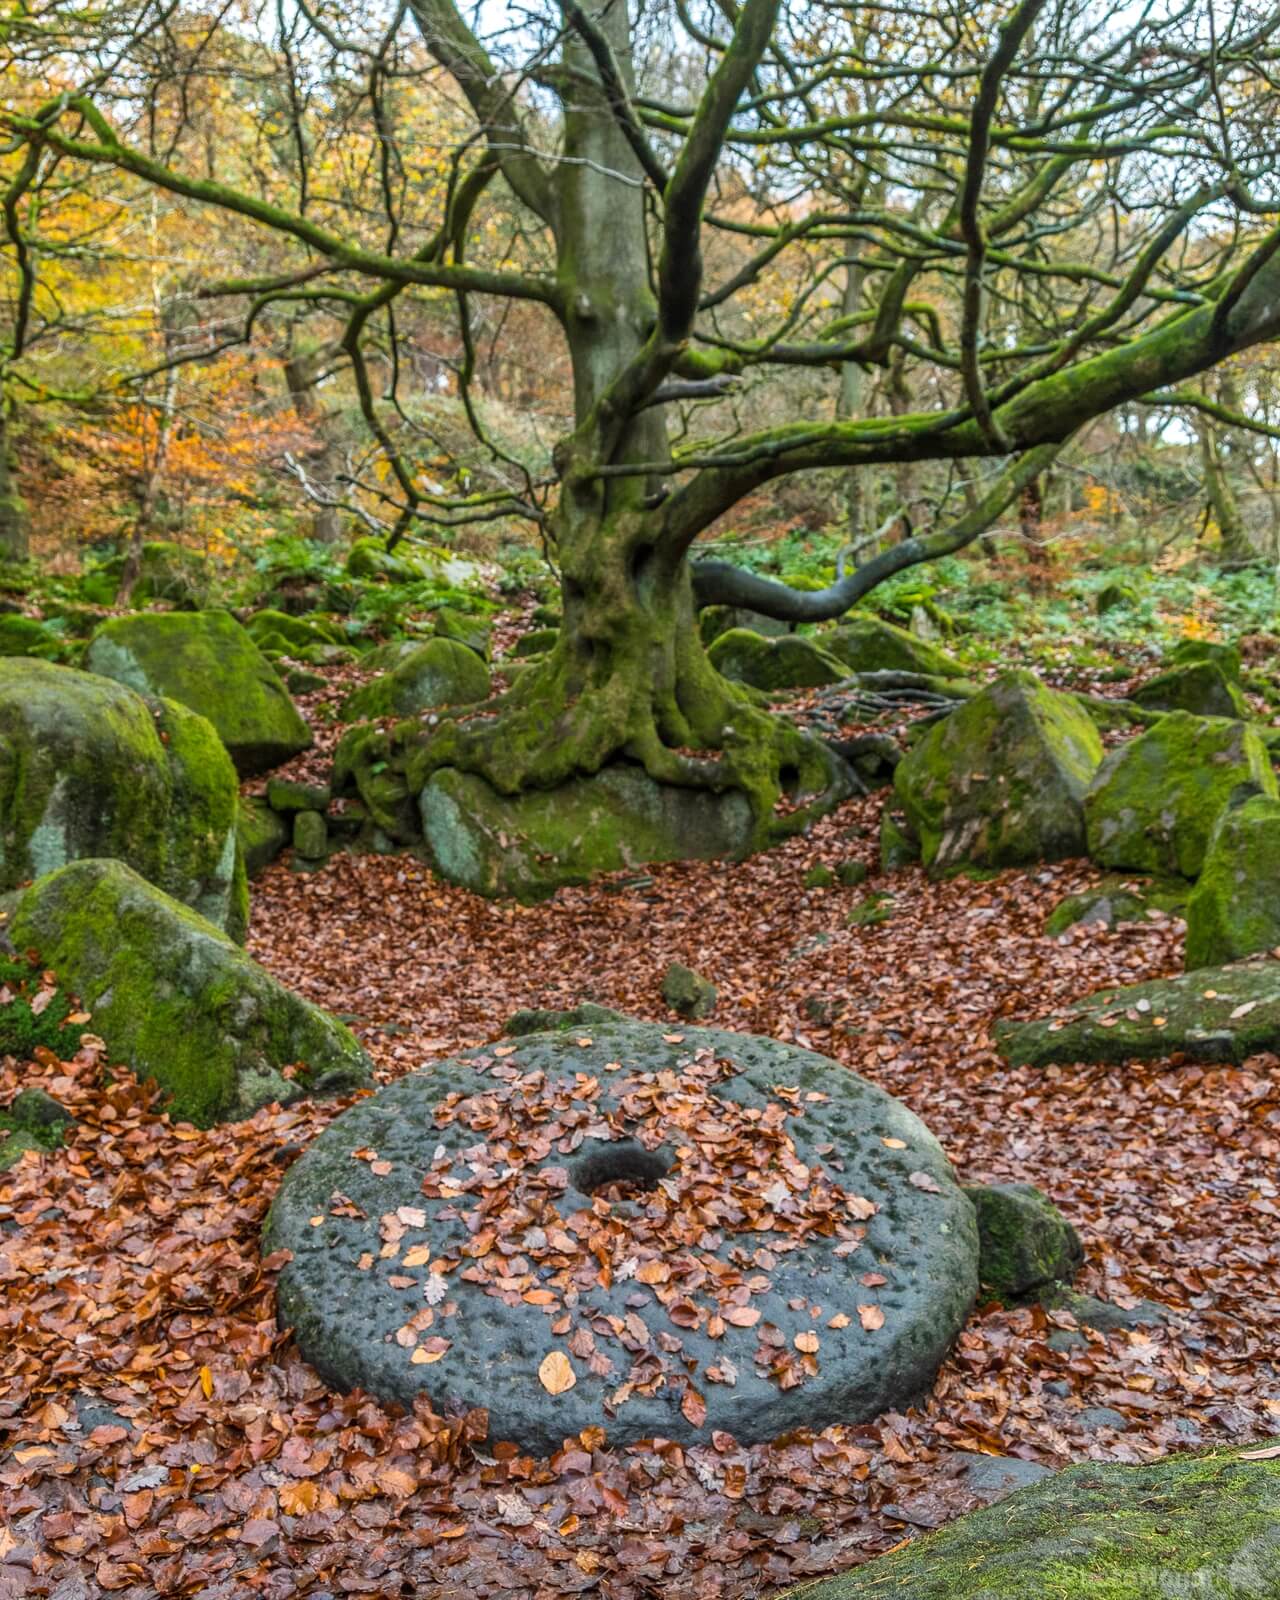 Image of Padley Gorge Millstone by Andy Killingbeck